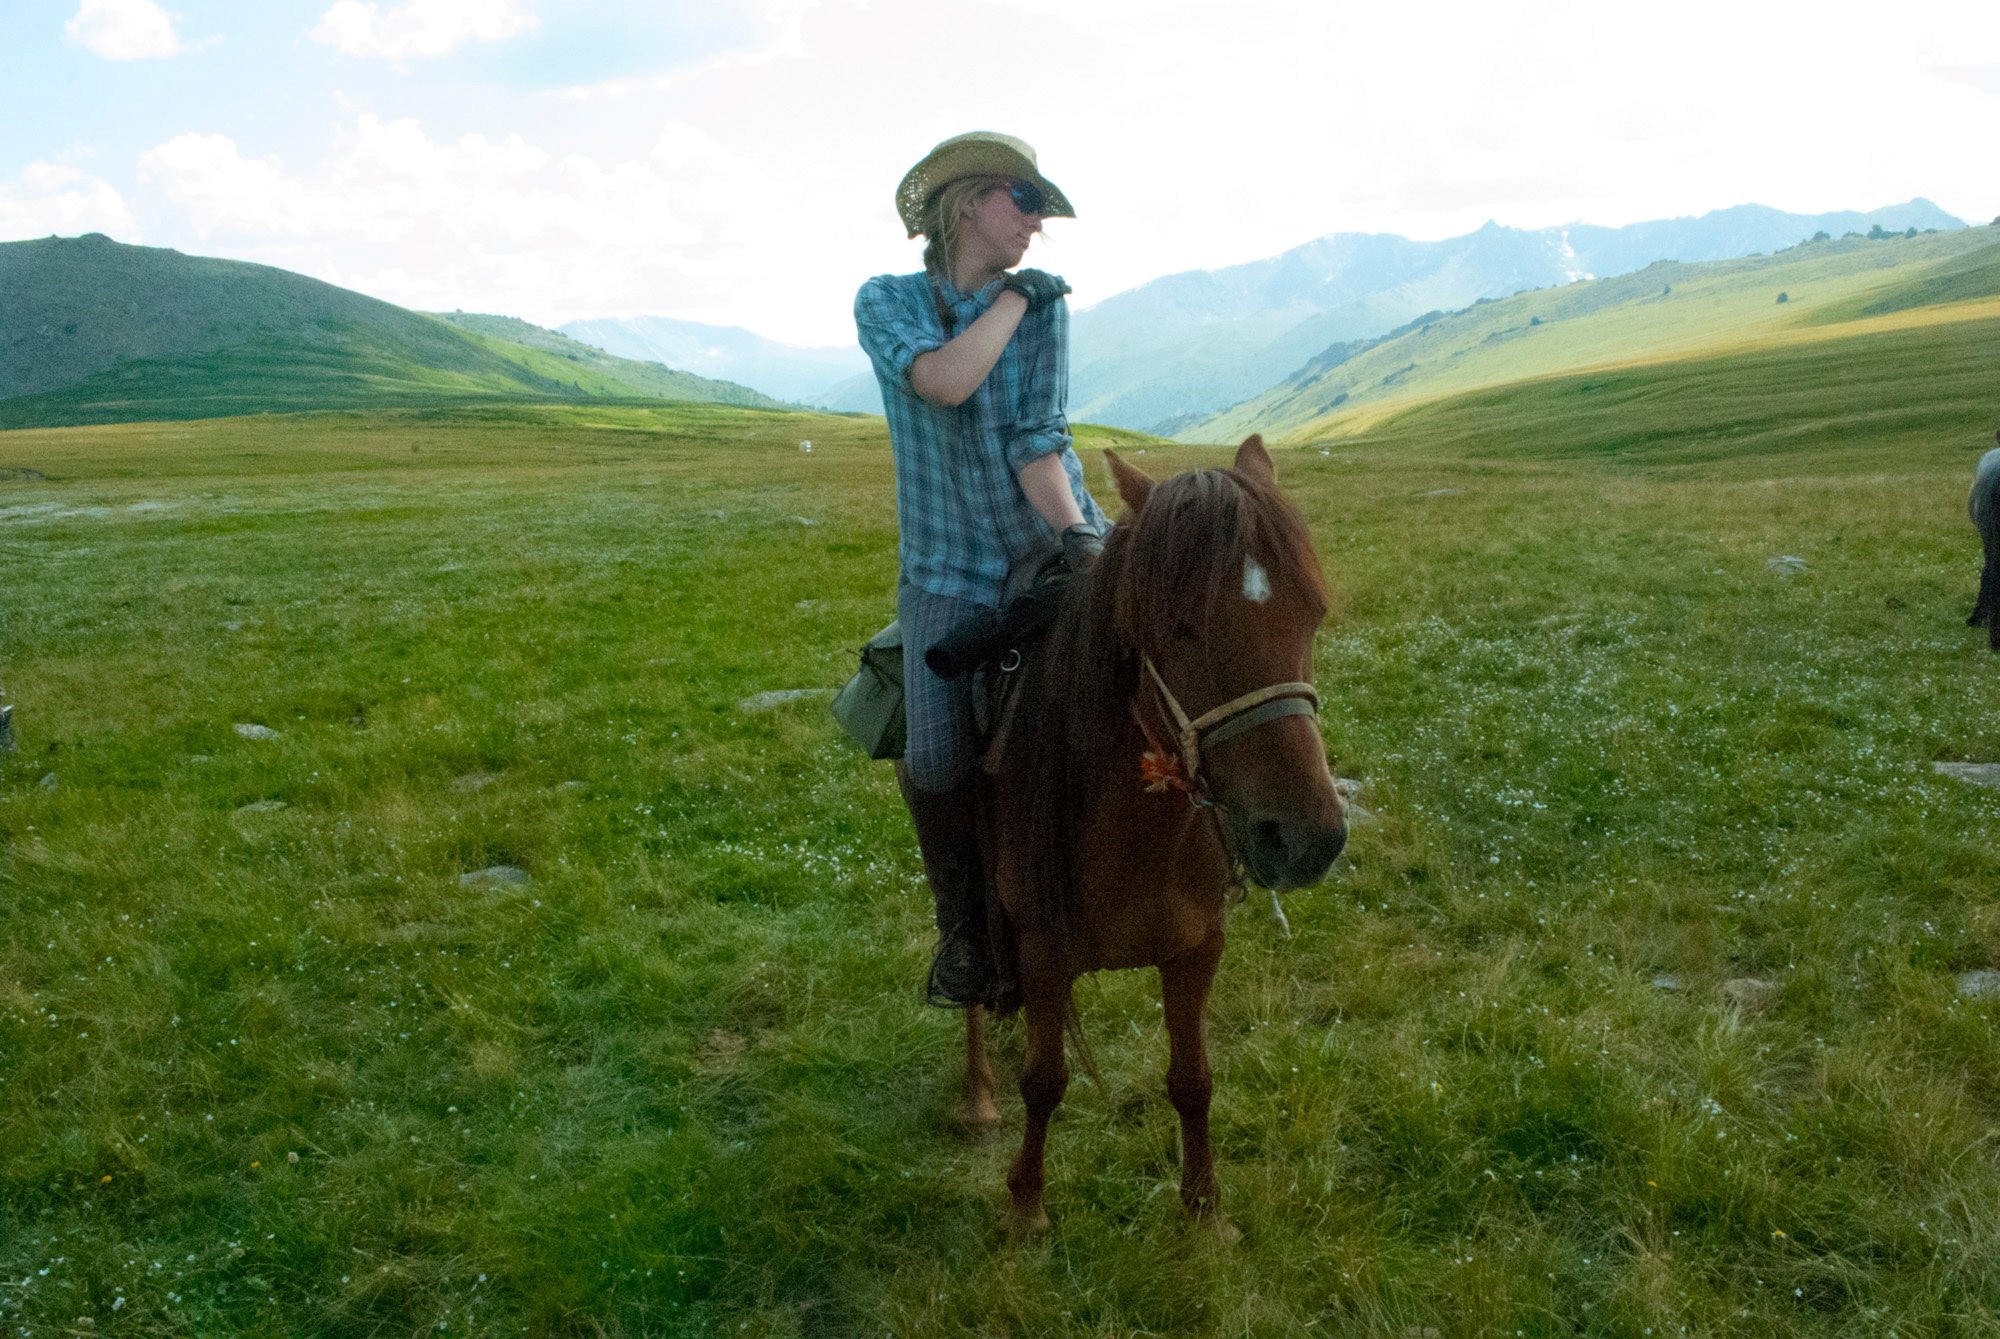 Horse riding in Mongolia